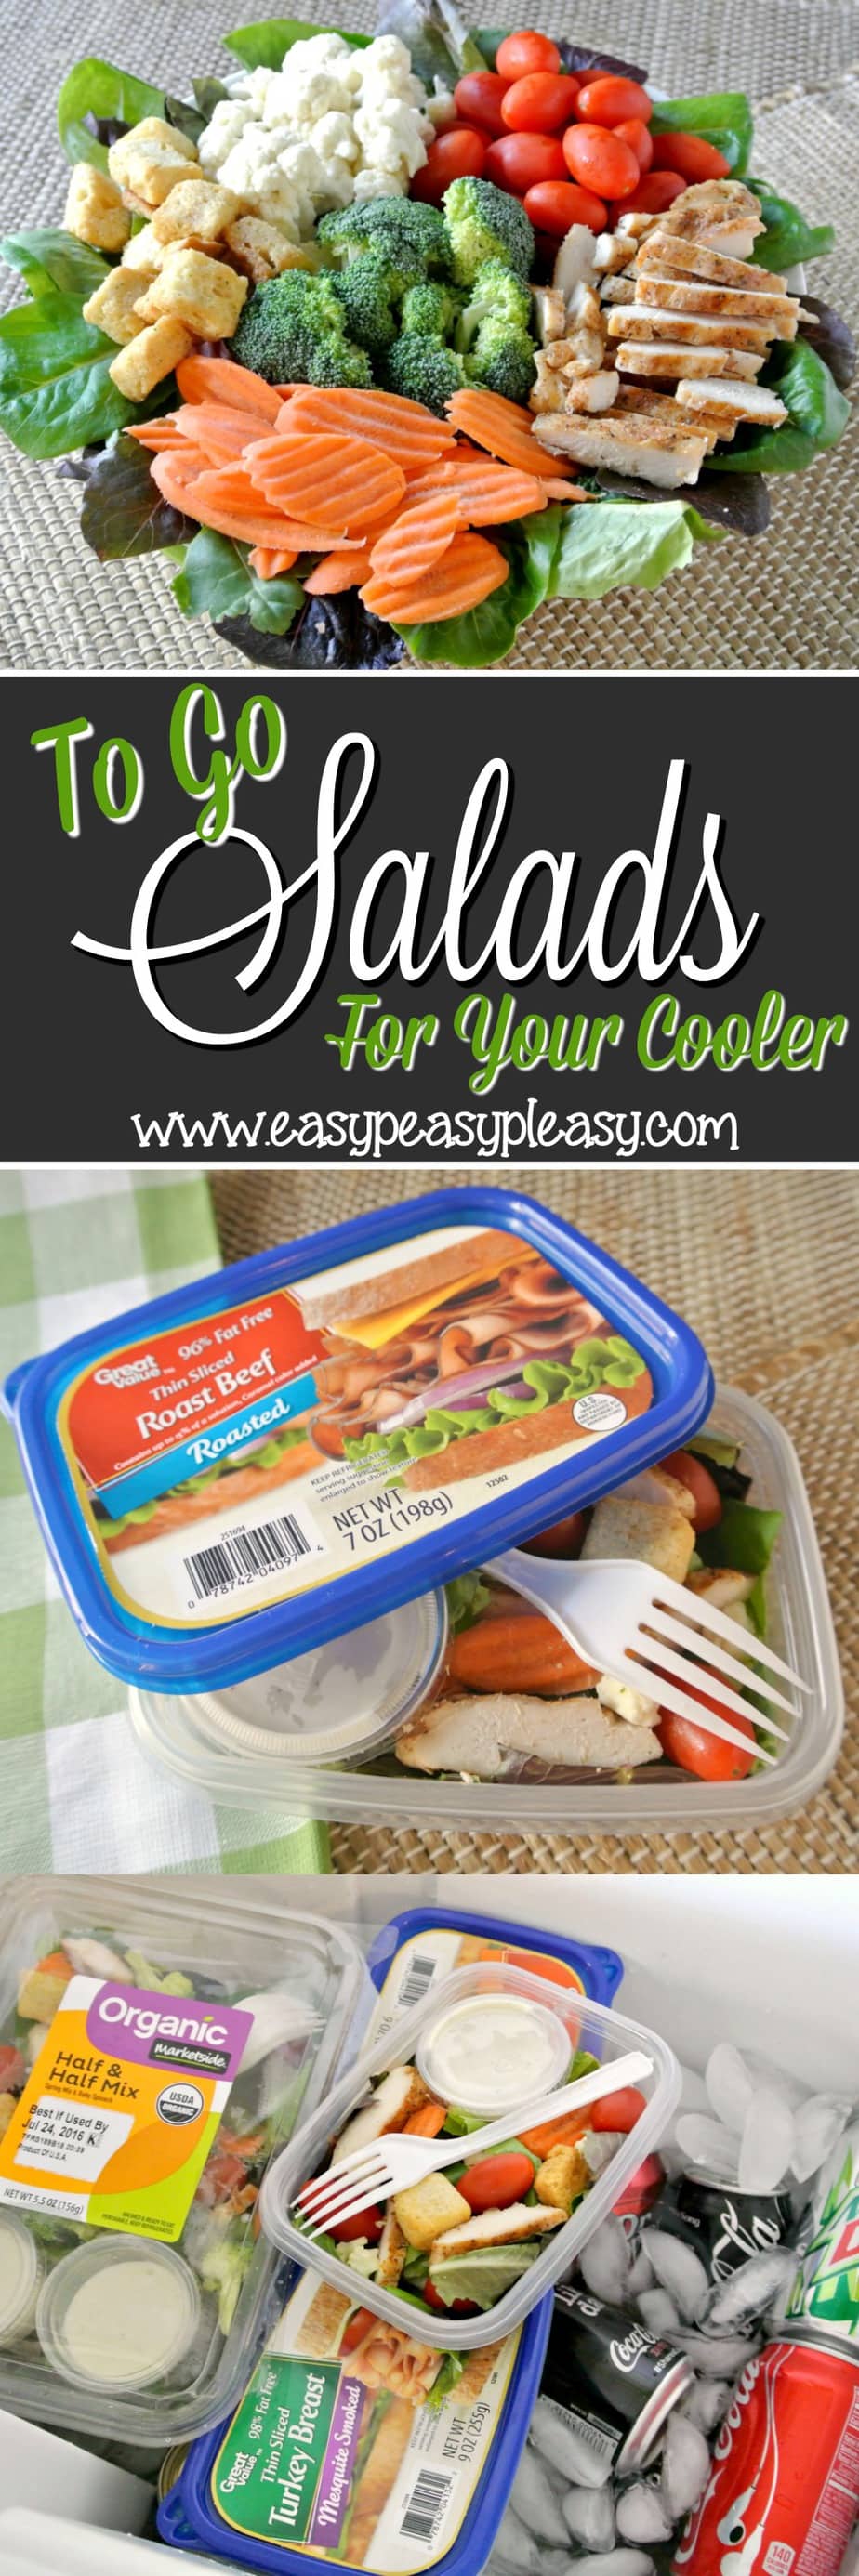 From salad to container to cooler to trash. Easy To Go Salads with no cleanup are the perfect addition to your cooler when hitting the lake, ballpark, beach and tailgating.